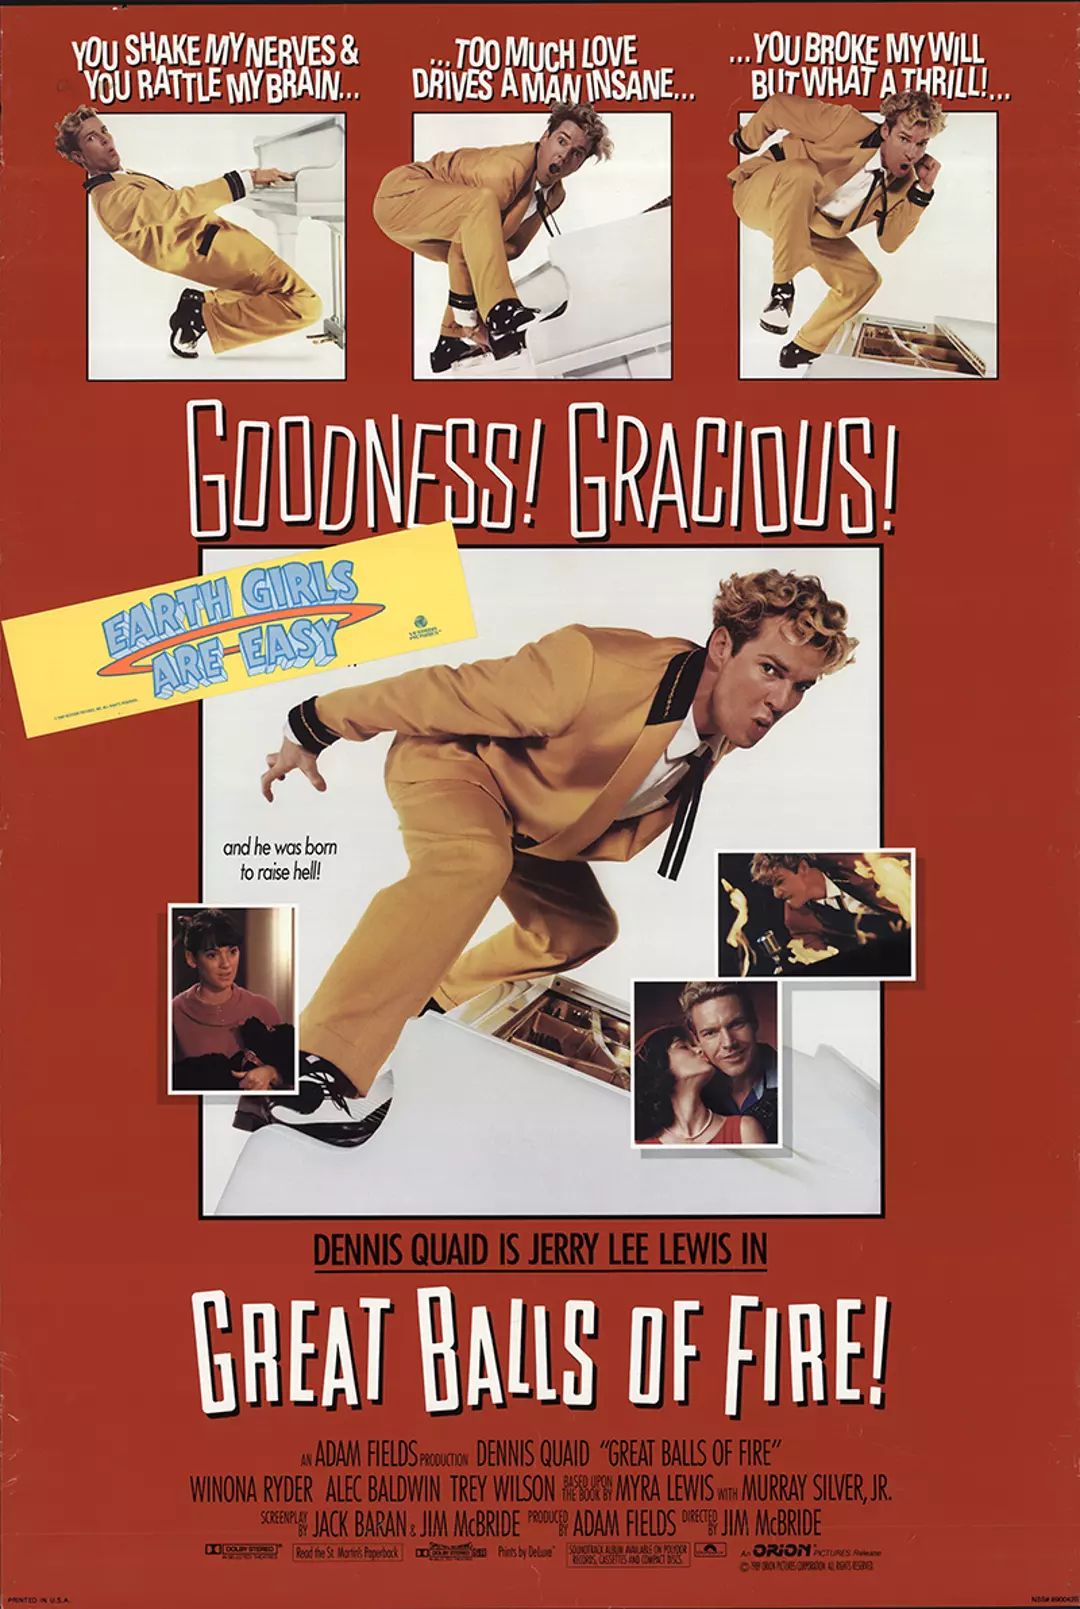 30 Years Ago: Jerry Lee Lewis 'Great Balls of Fire' Film Fizzles